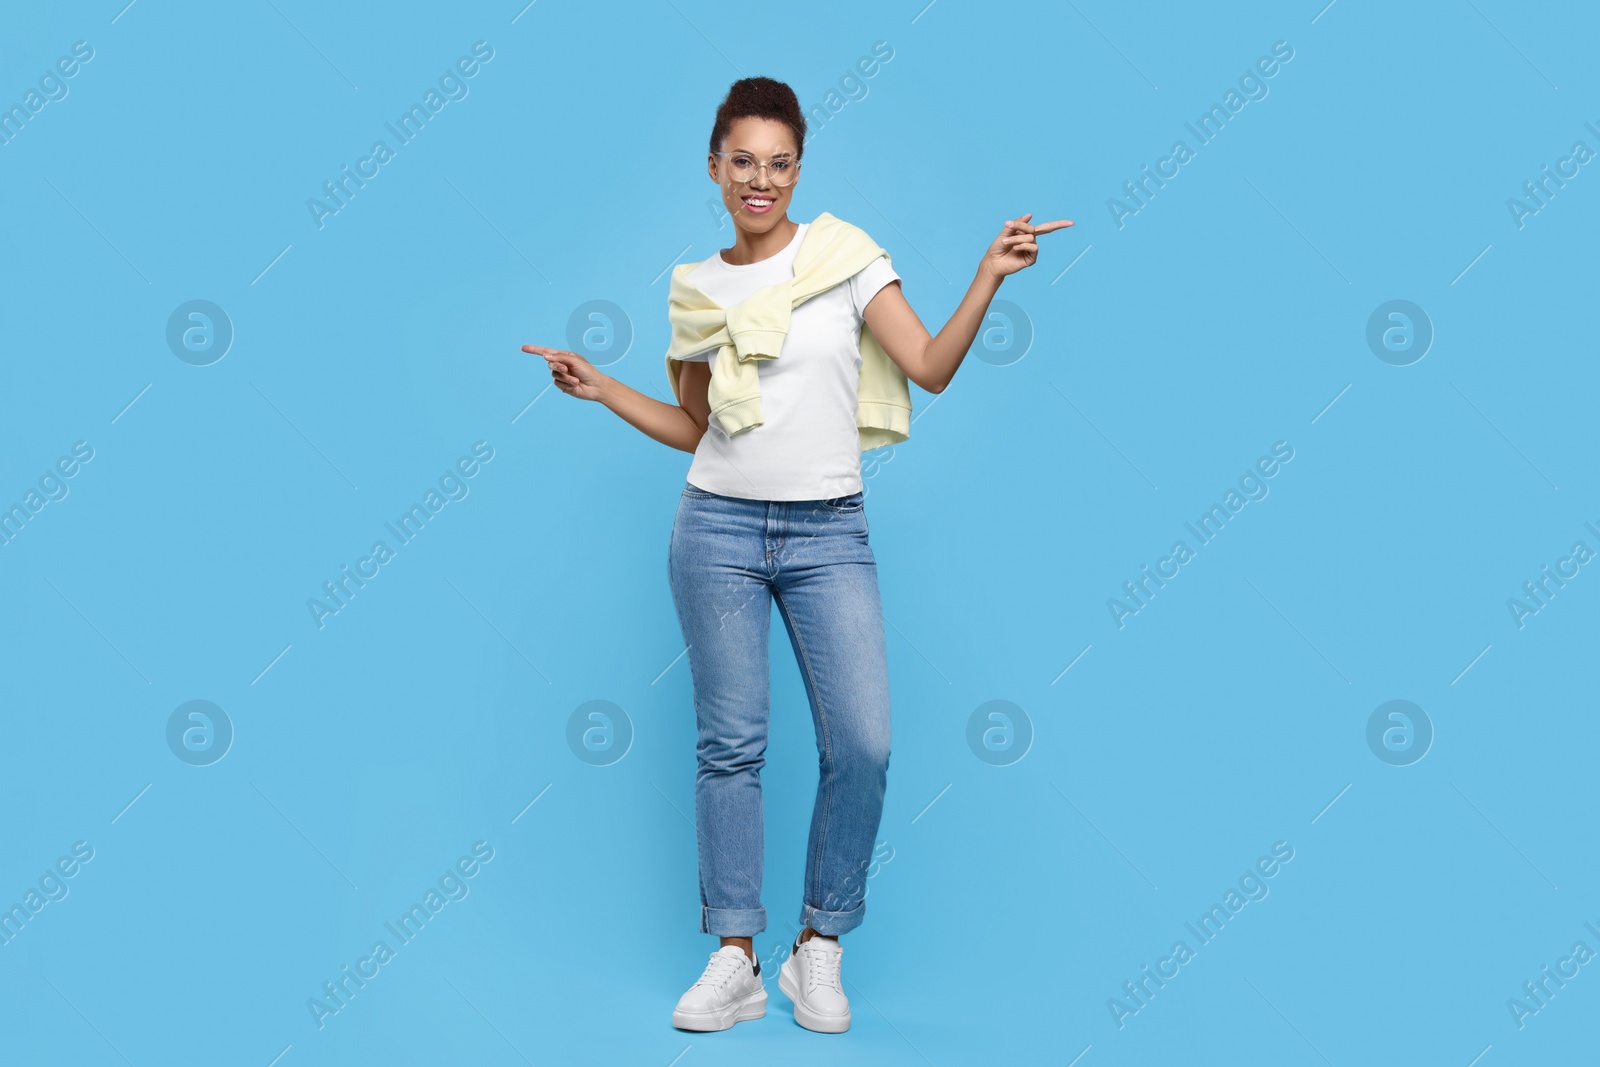 Photo of Happy young woman in stylish eyeglasses dancing on light blue background